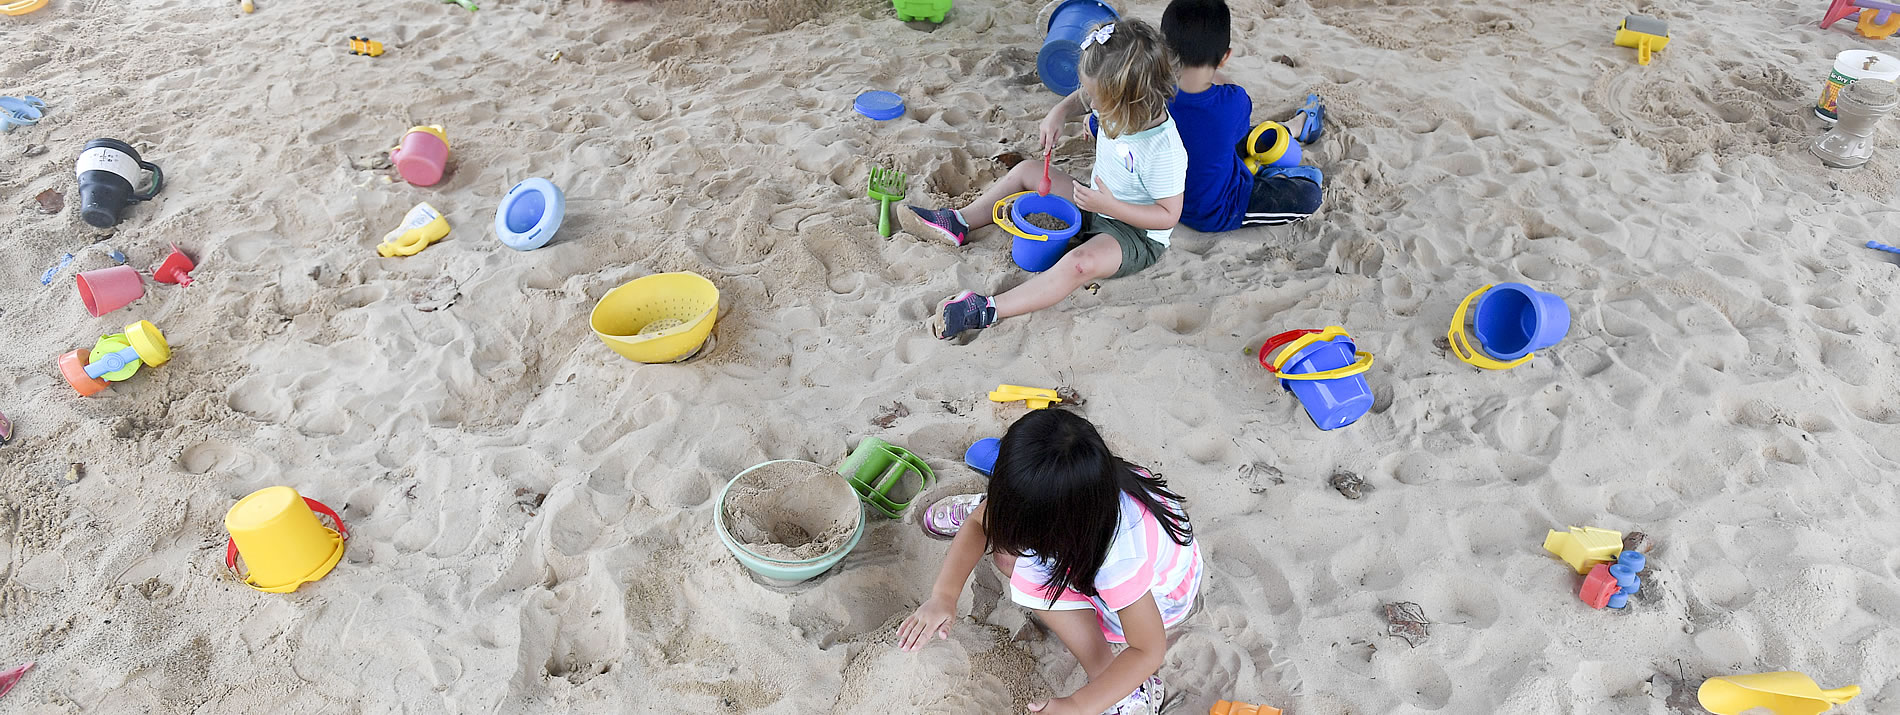 three young children playing in a sandbox